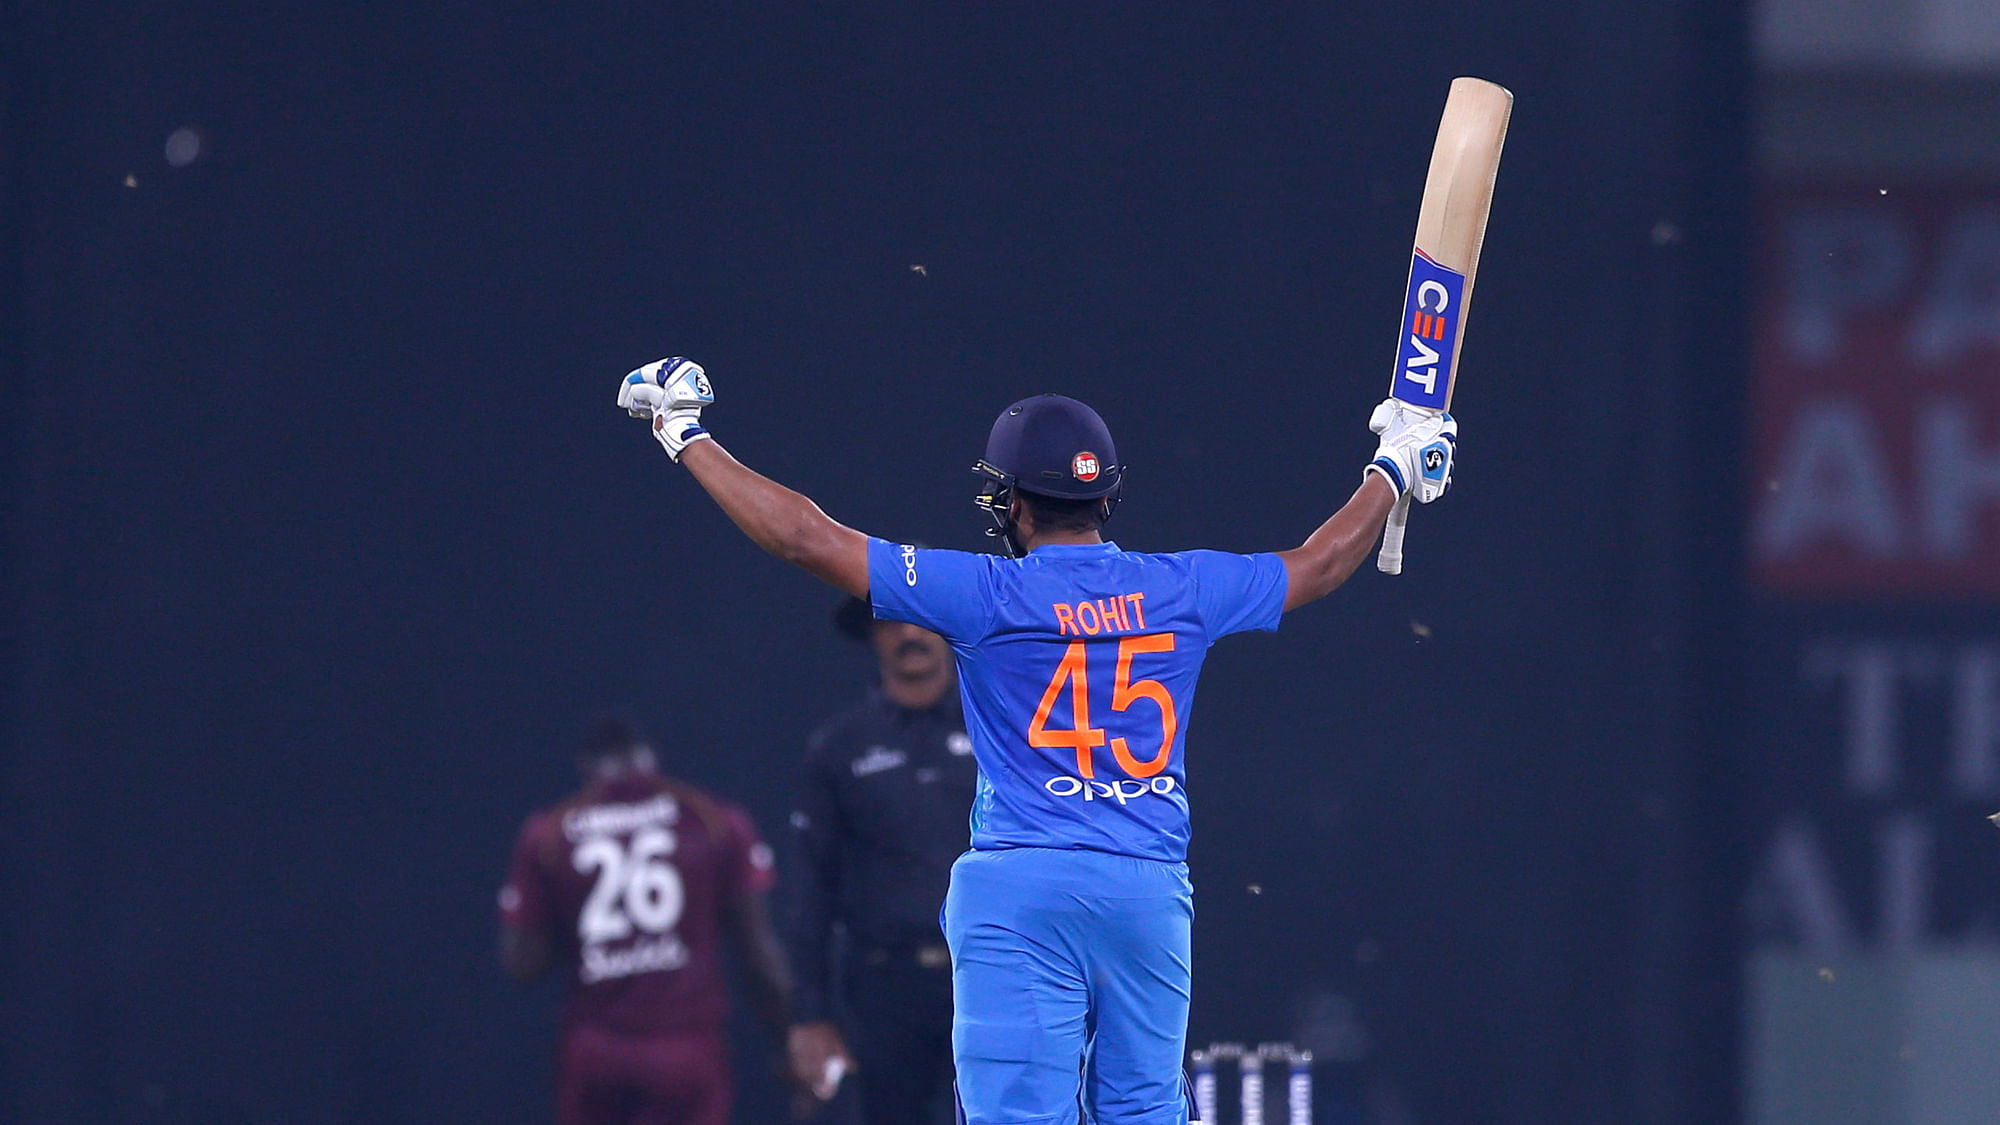 Jos Buttler was effusive in his praise for Rohit Sharma, describing the India opener as an awesome player.